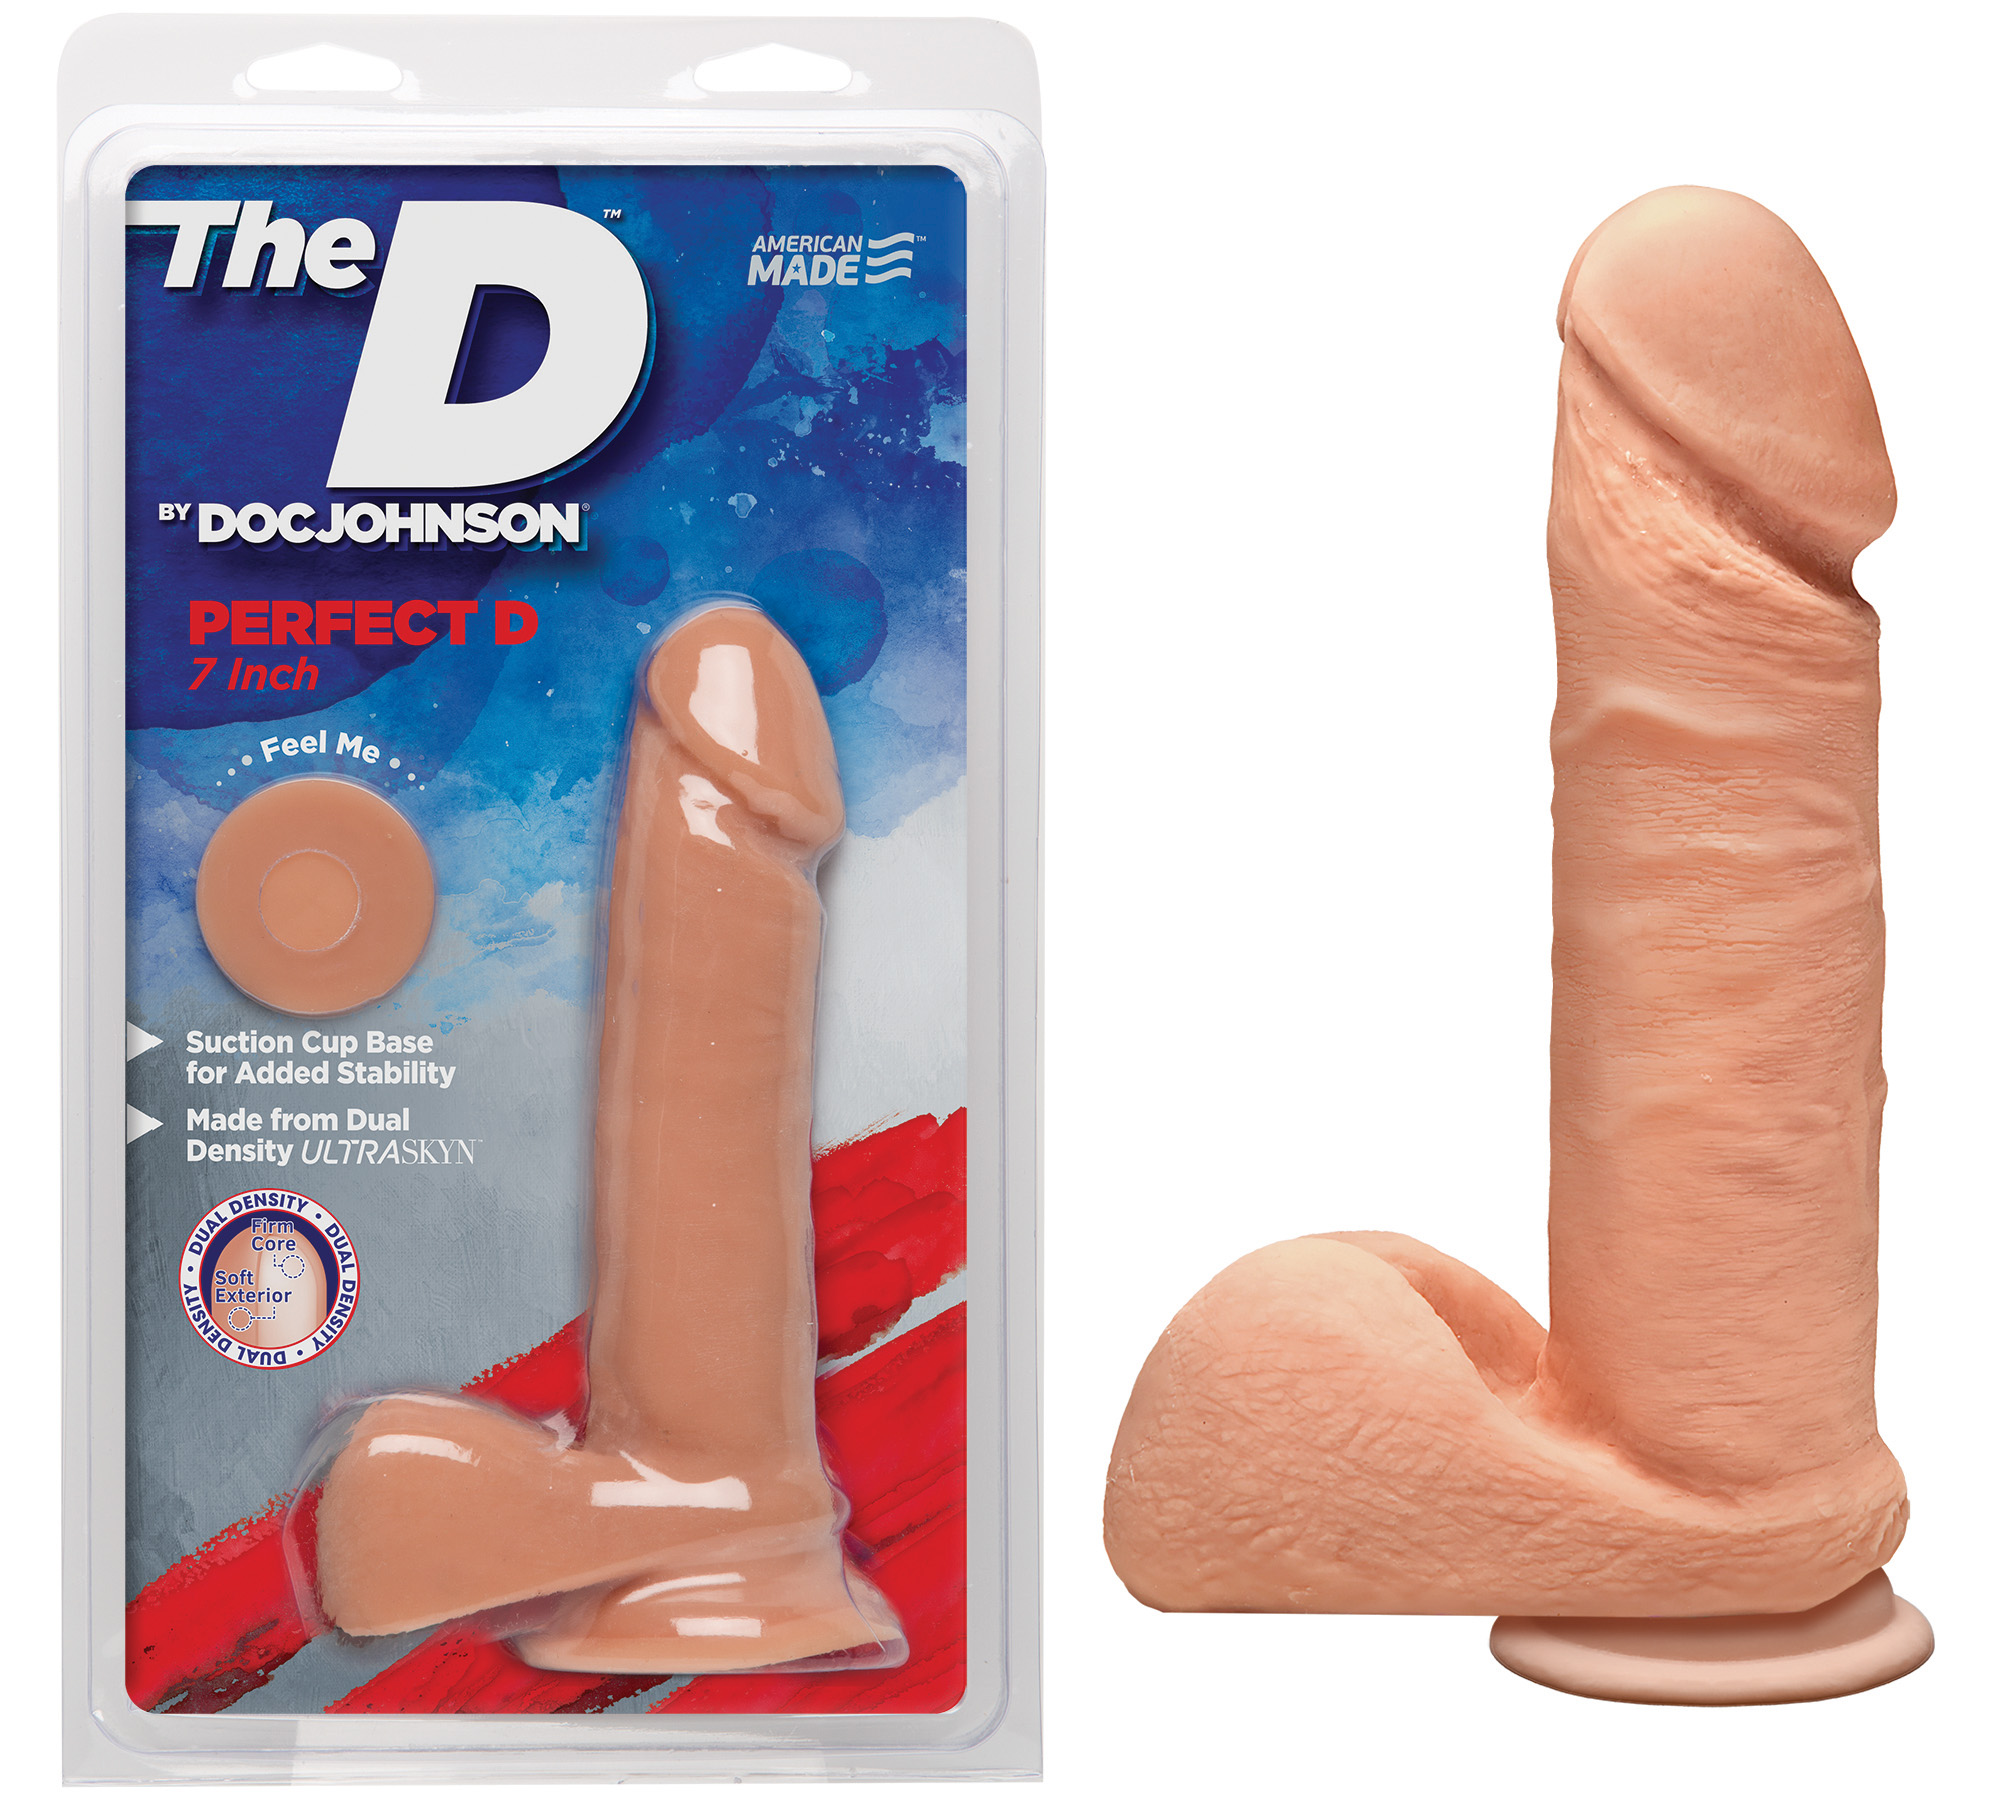 DOC JOHNSON The D Perfect D Dual Density 7" with Balls